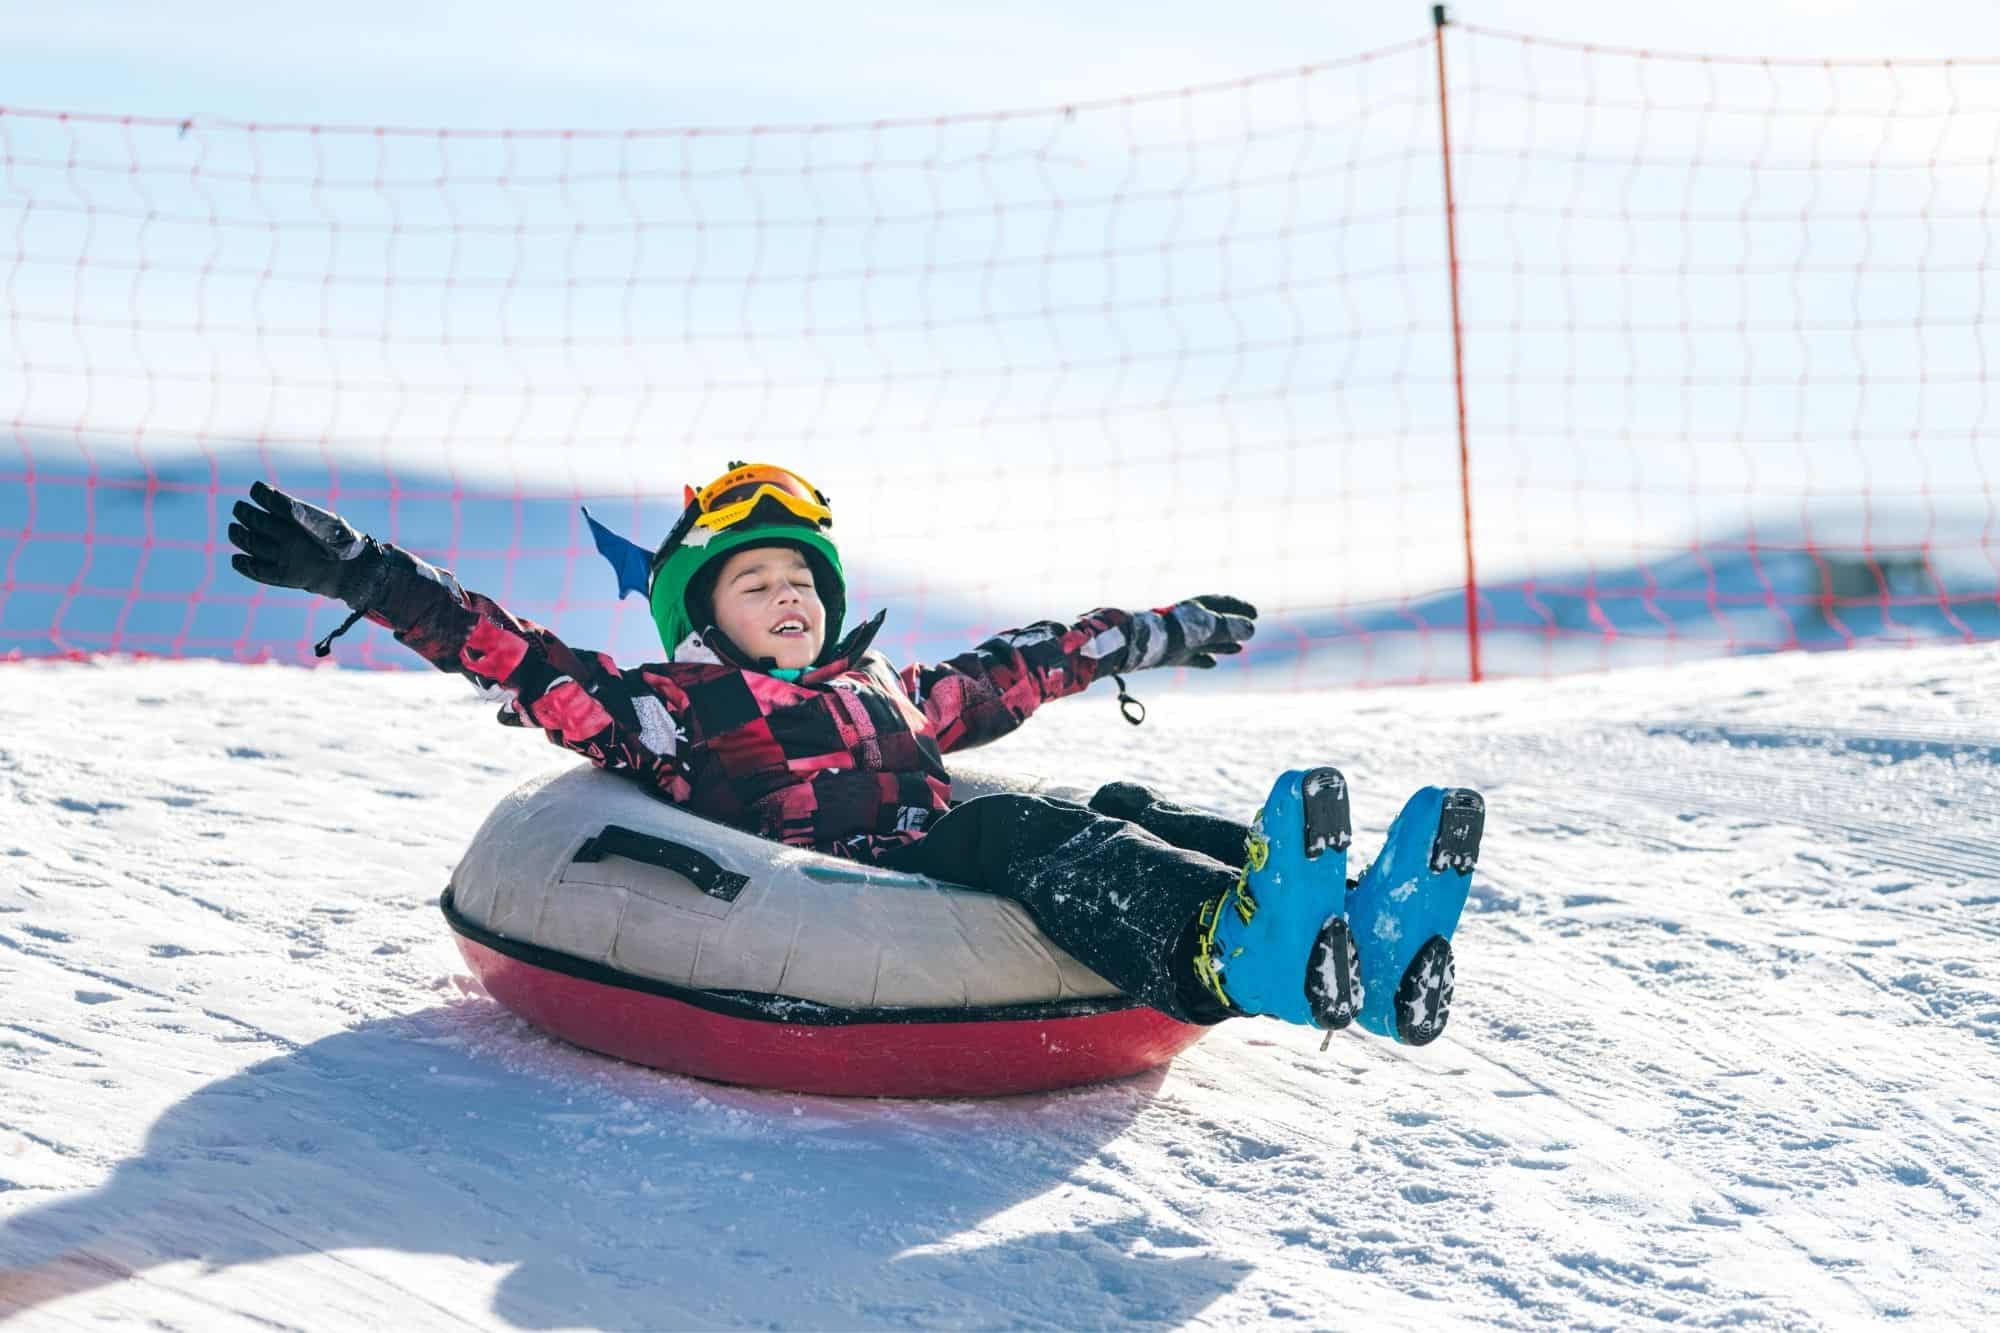 Child in ski clothes and ski boots riding snow tube